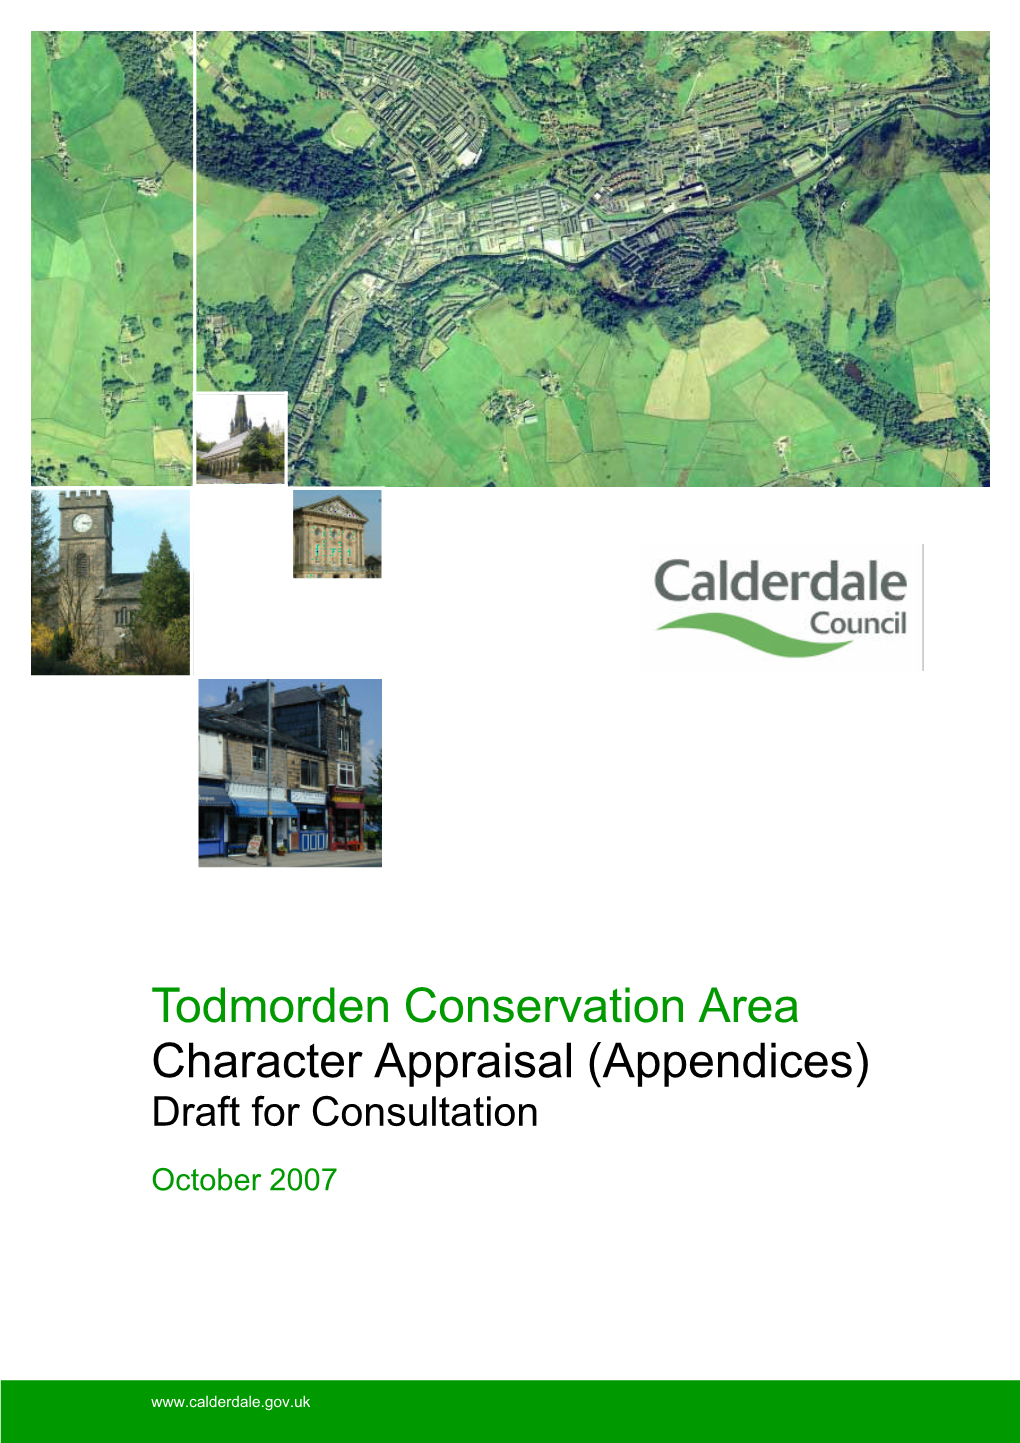 Todmorden Conservation Area Character Appraisal (Appendices) Draft for Consultation